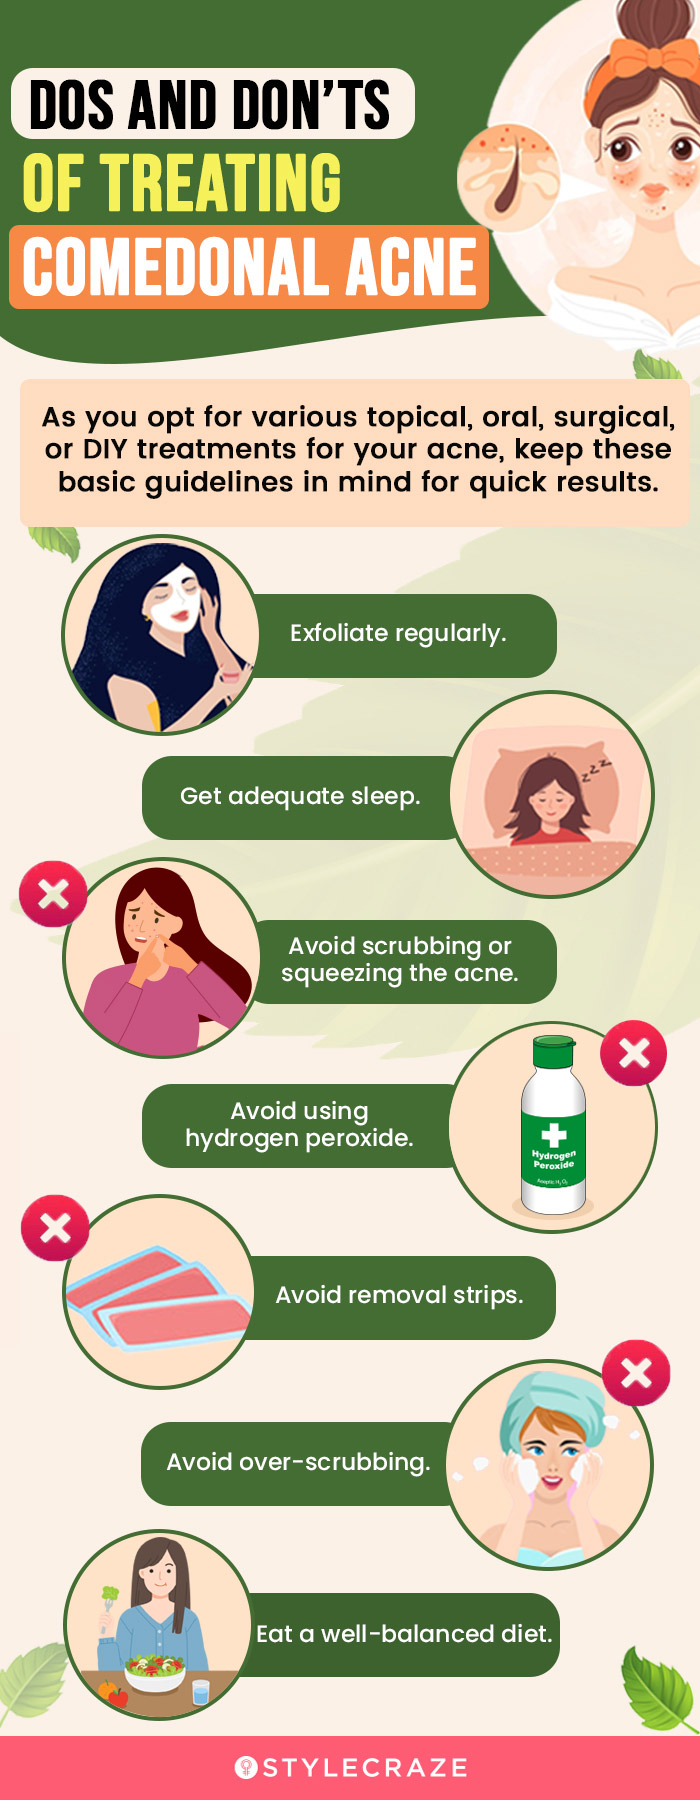 do and donts of treating comedonal acne (infographic)